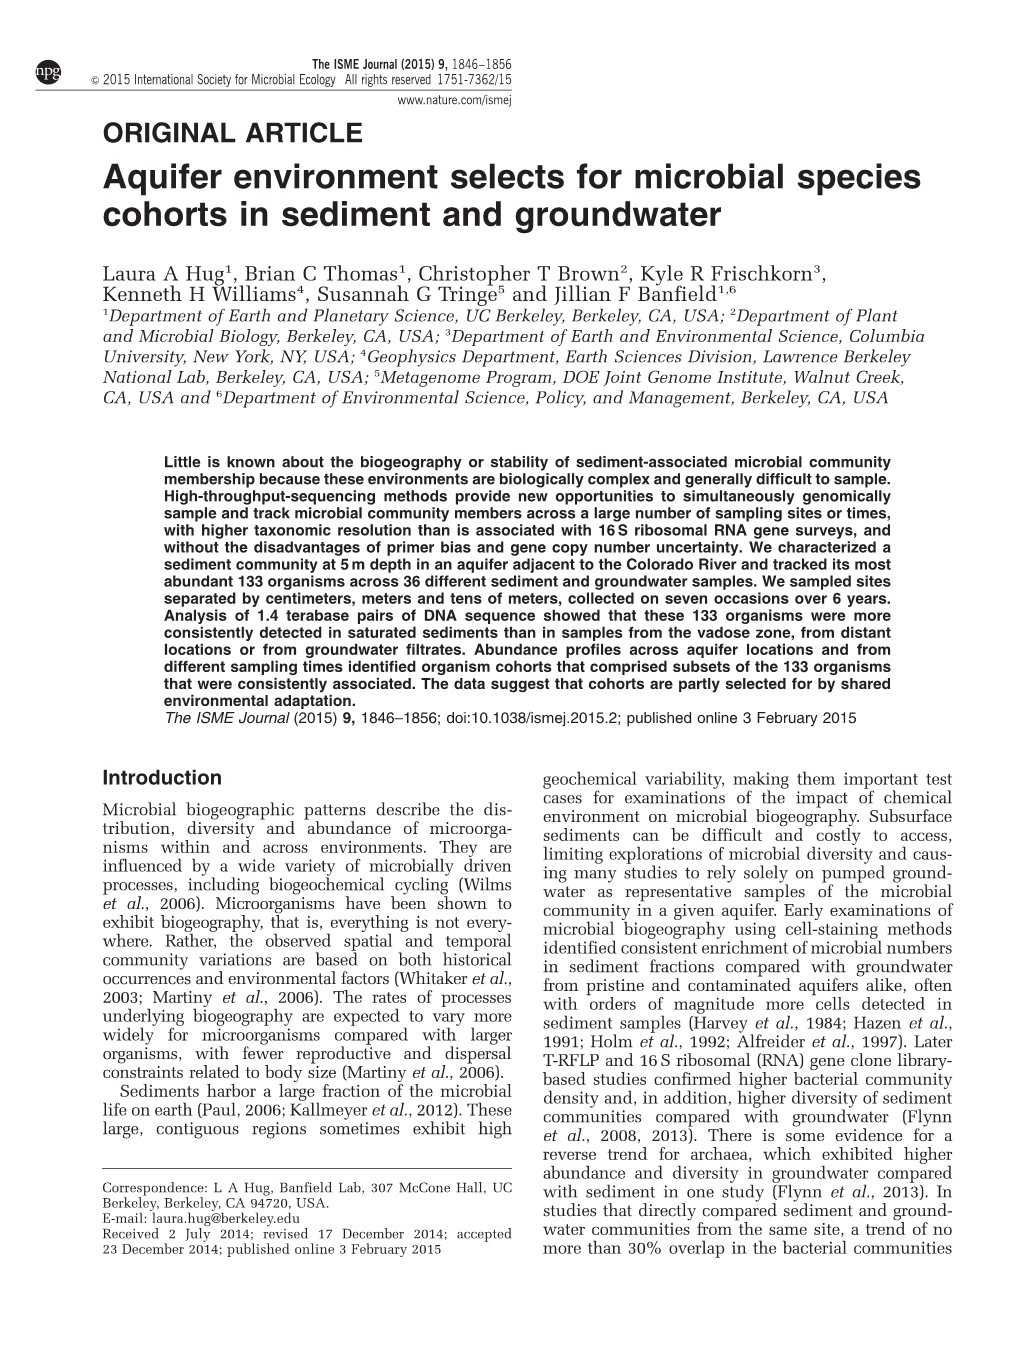 Aquifer Environment Selects for Microbial Species Cohorts in Sediment and Groundwater